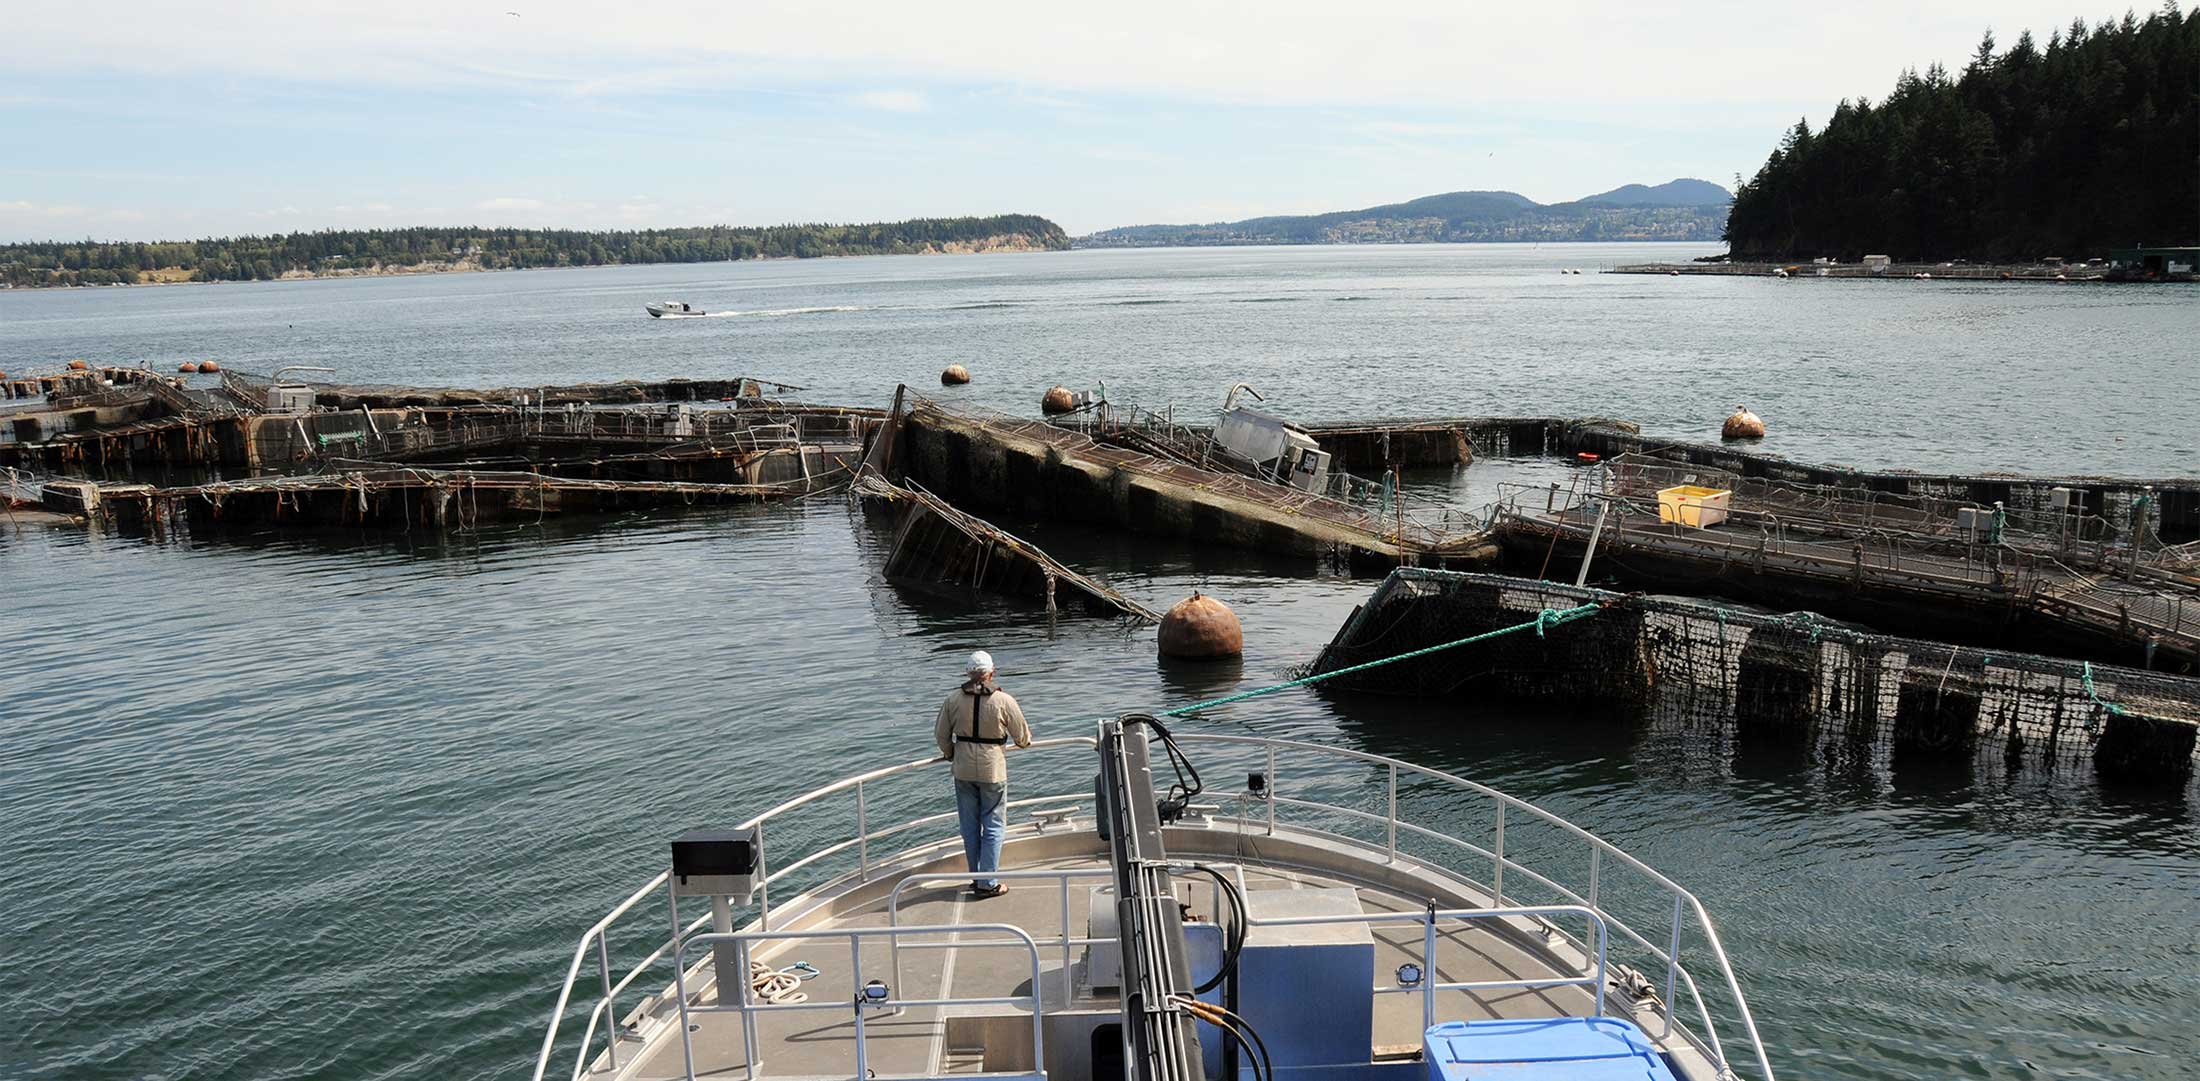 A man standing on the prow of a fishing vessel surveys the remains of an industrial salmon farm's net pens